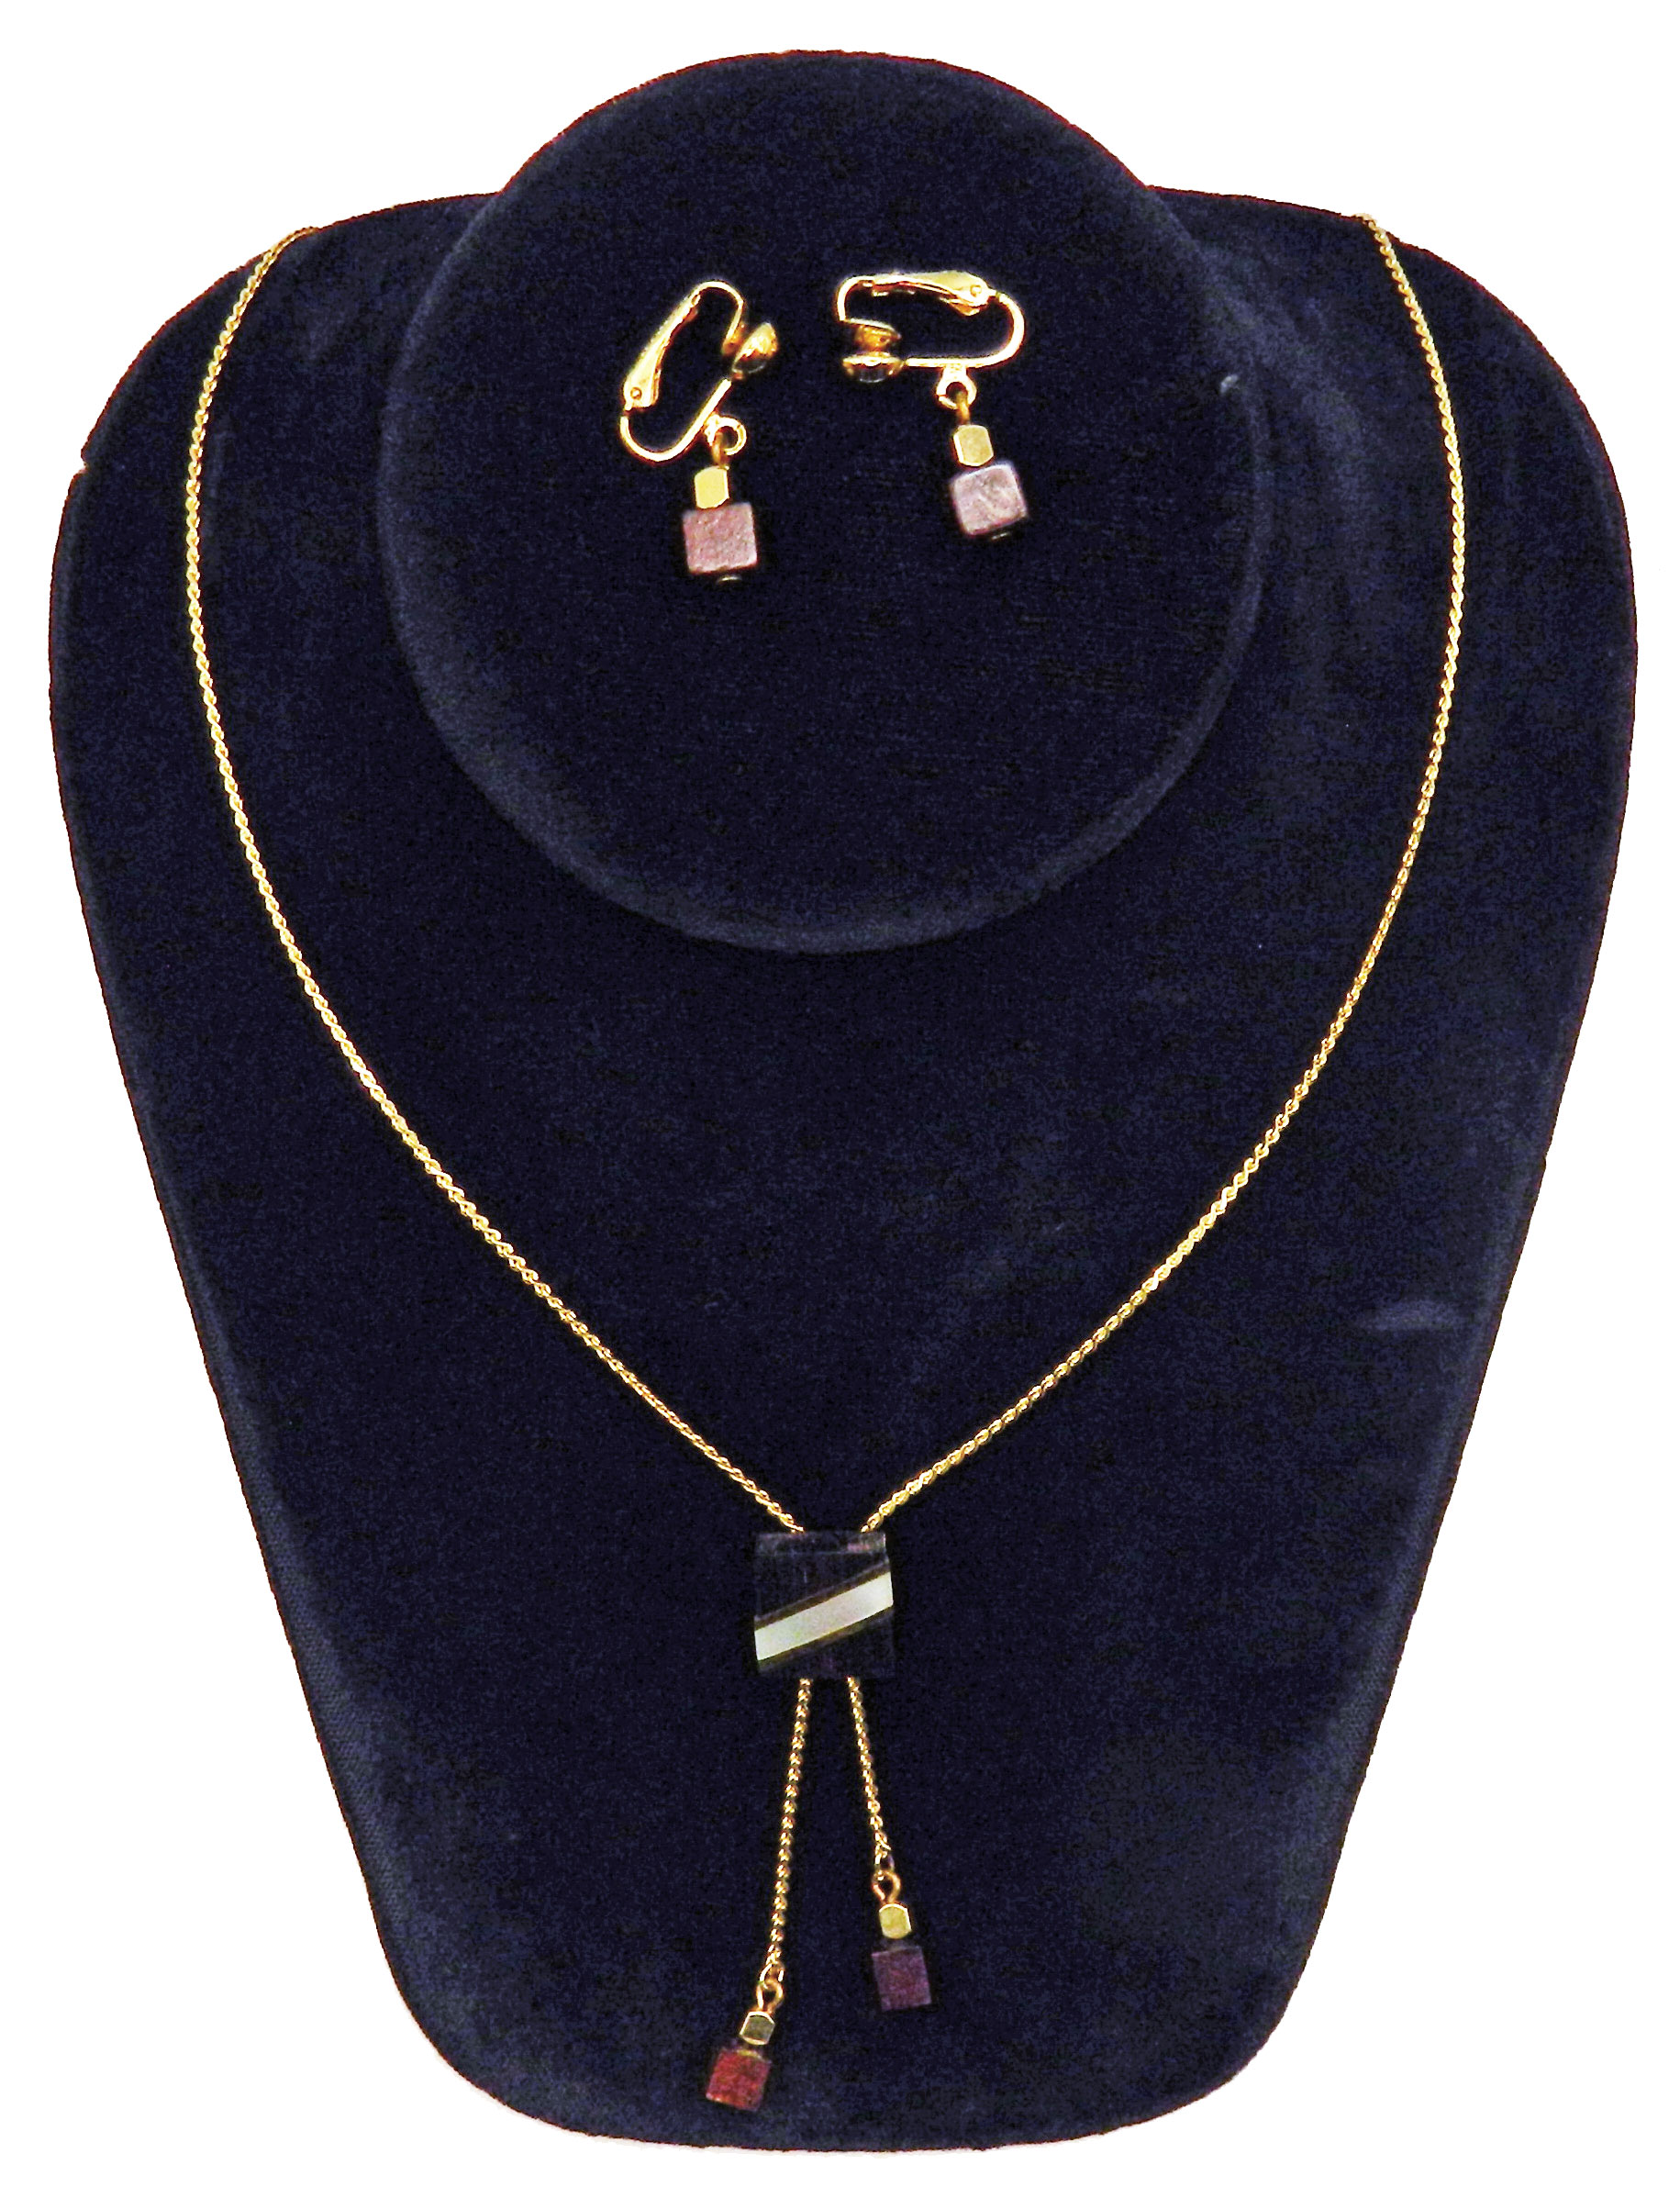 Park Lane bolo necklace and earring set